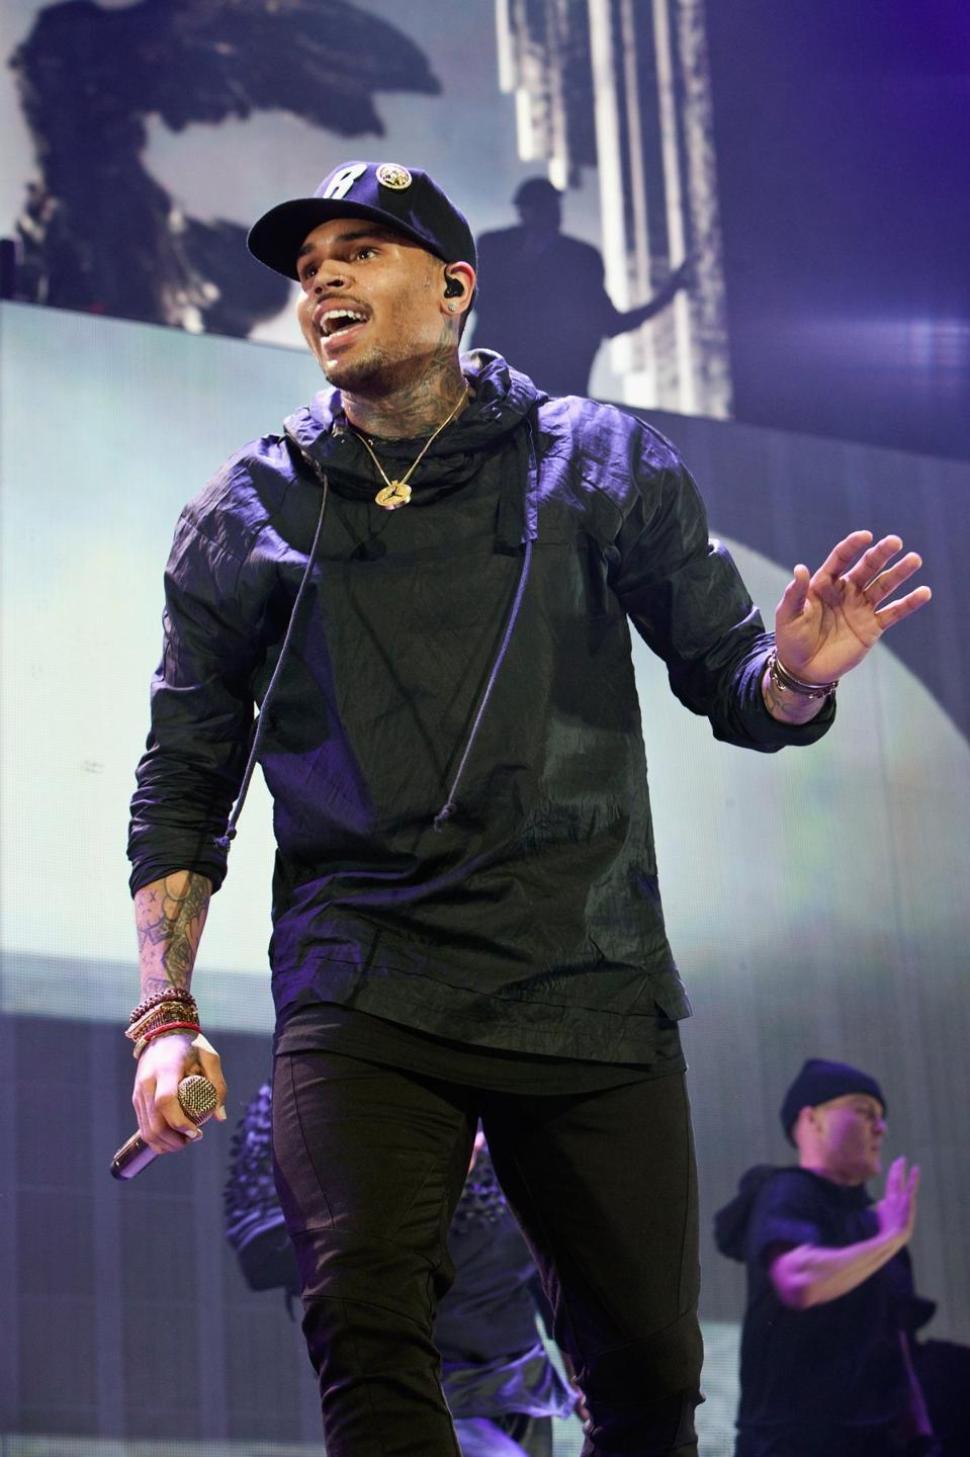 Chris Brown performs in Charlotte, North Carolina, earlier this month.